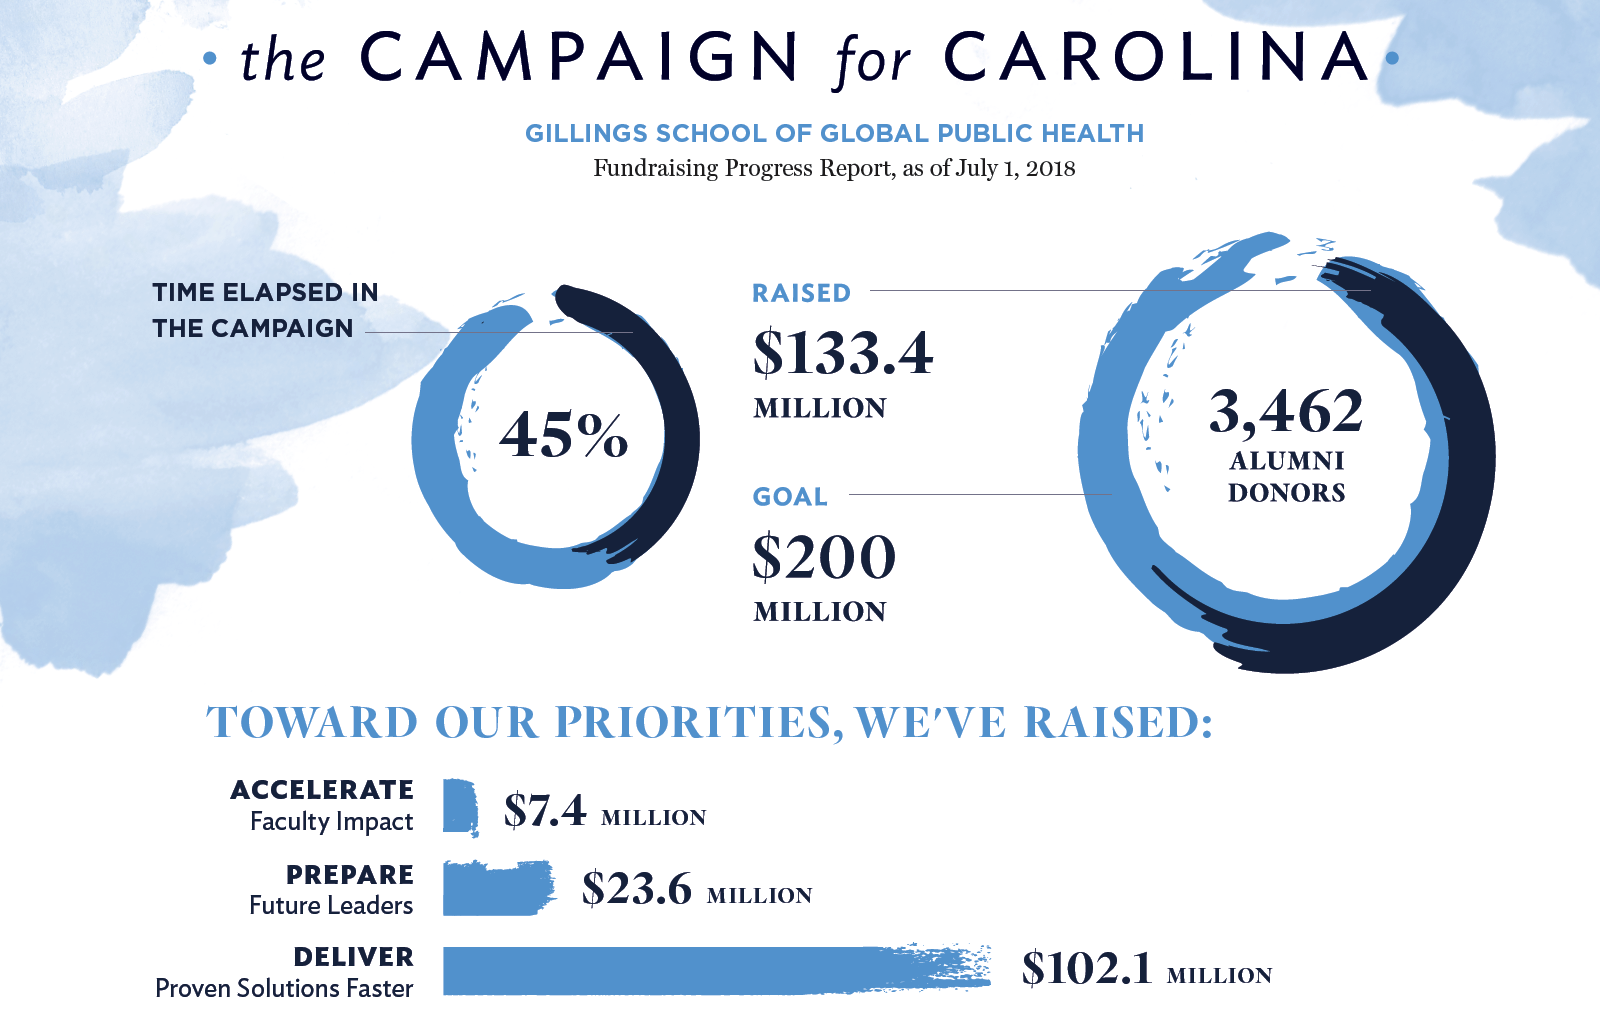 This infographic provides an update on the Campaign for Carolina.